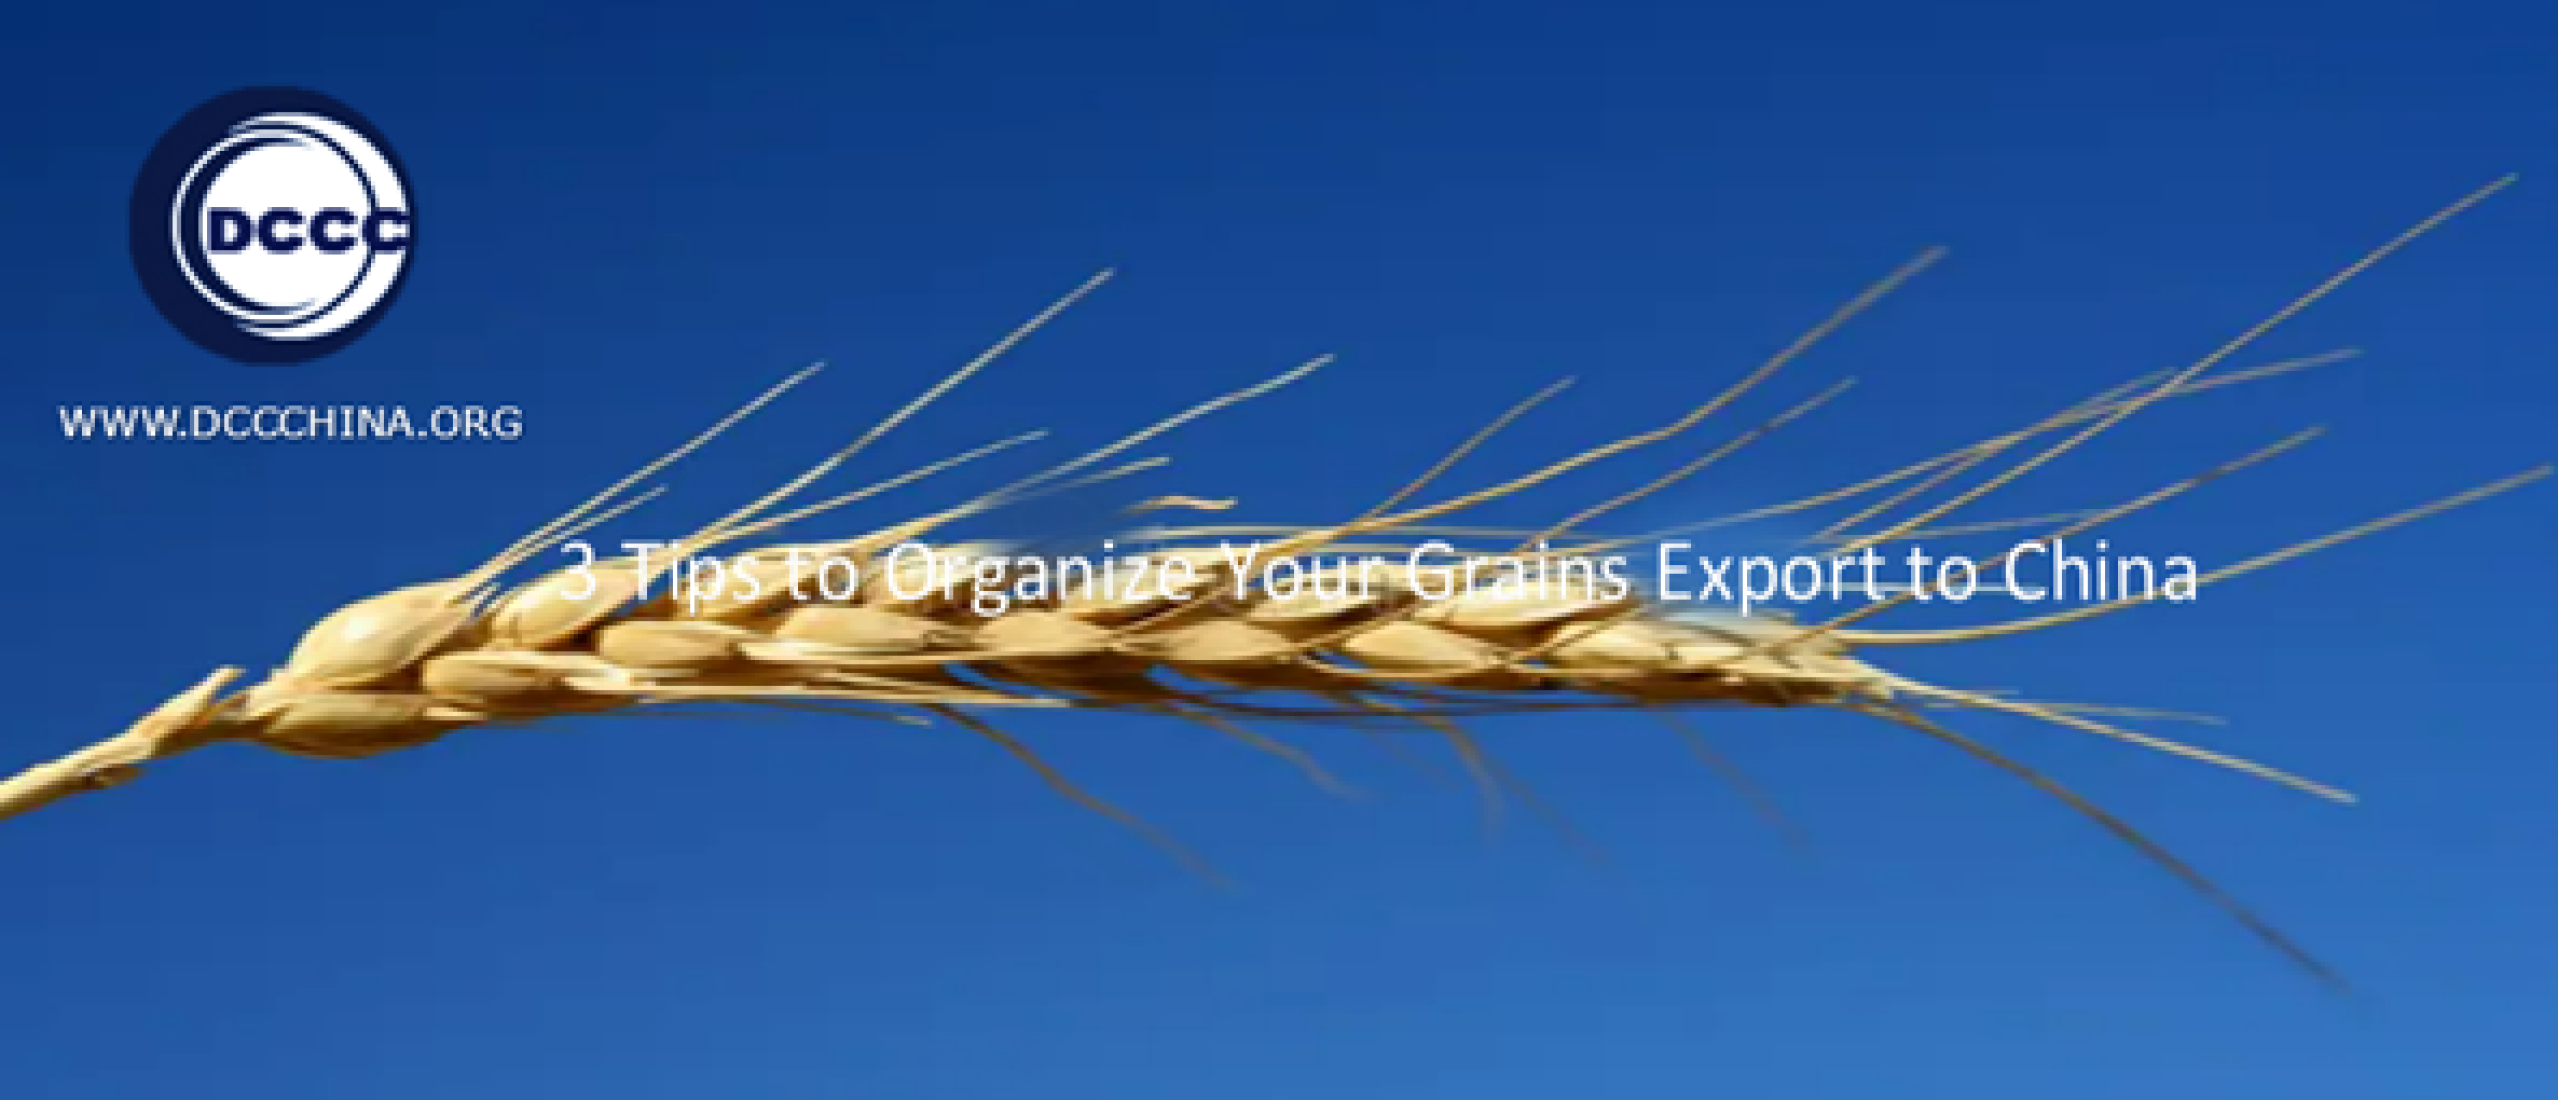 3 Strategic-Tips to Organize Grains Export to China